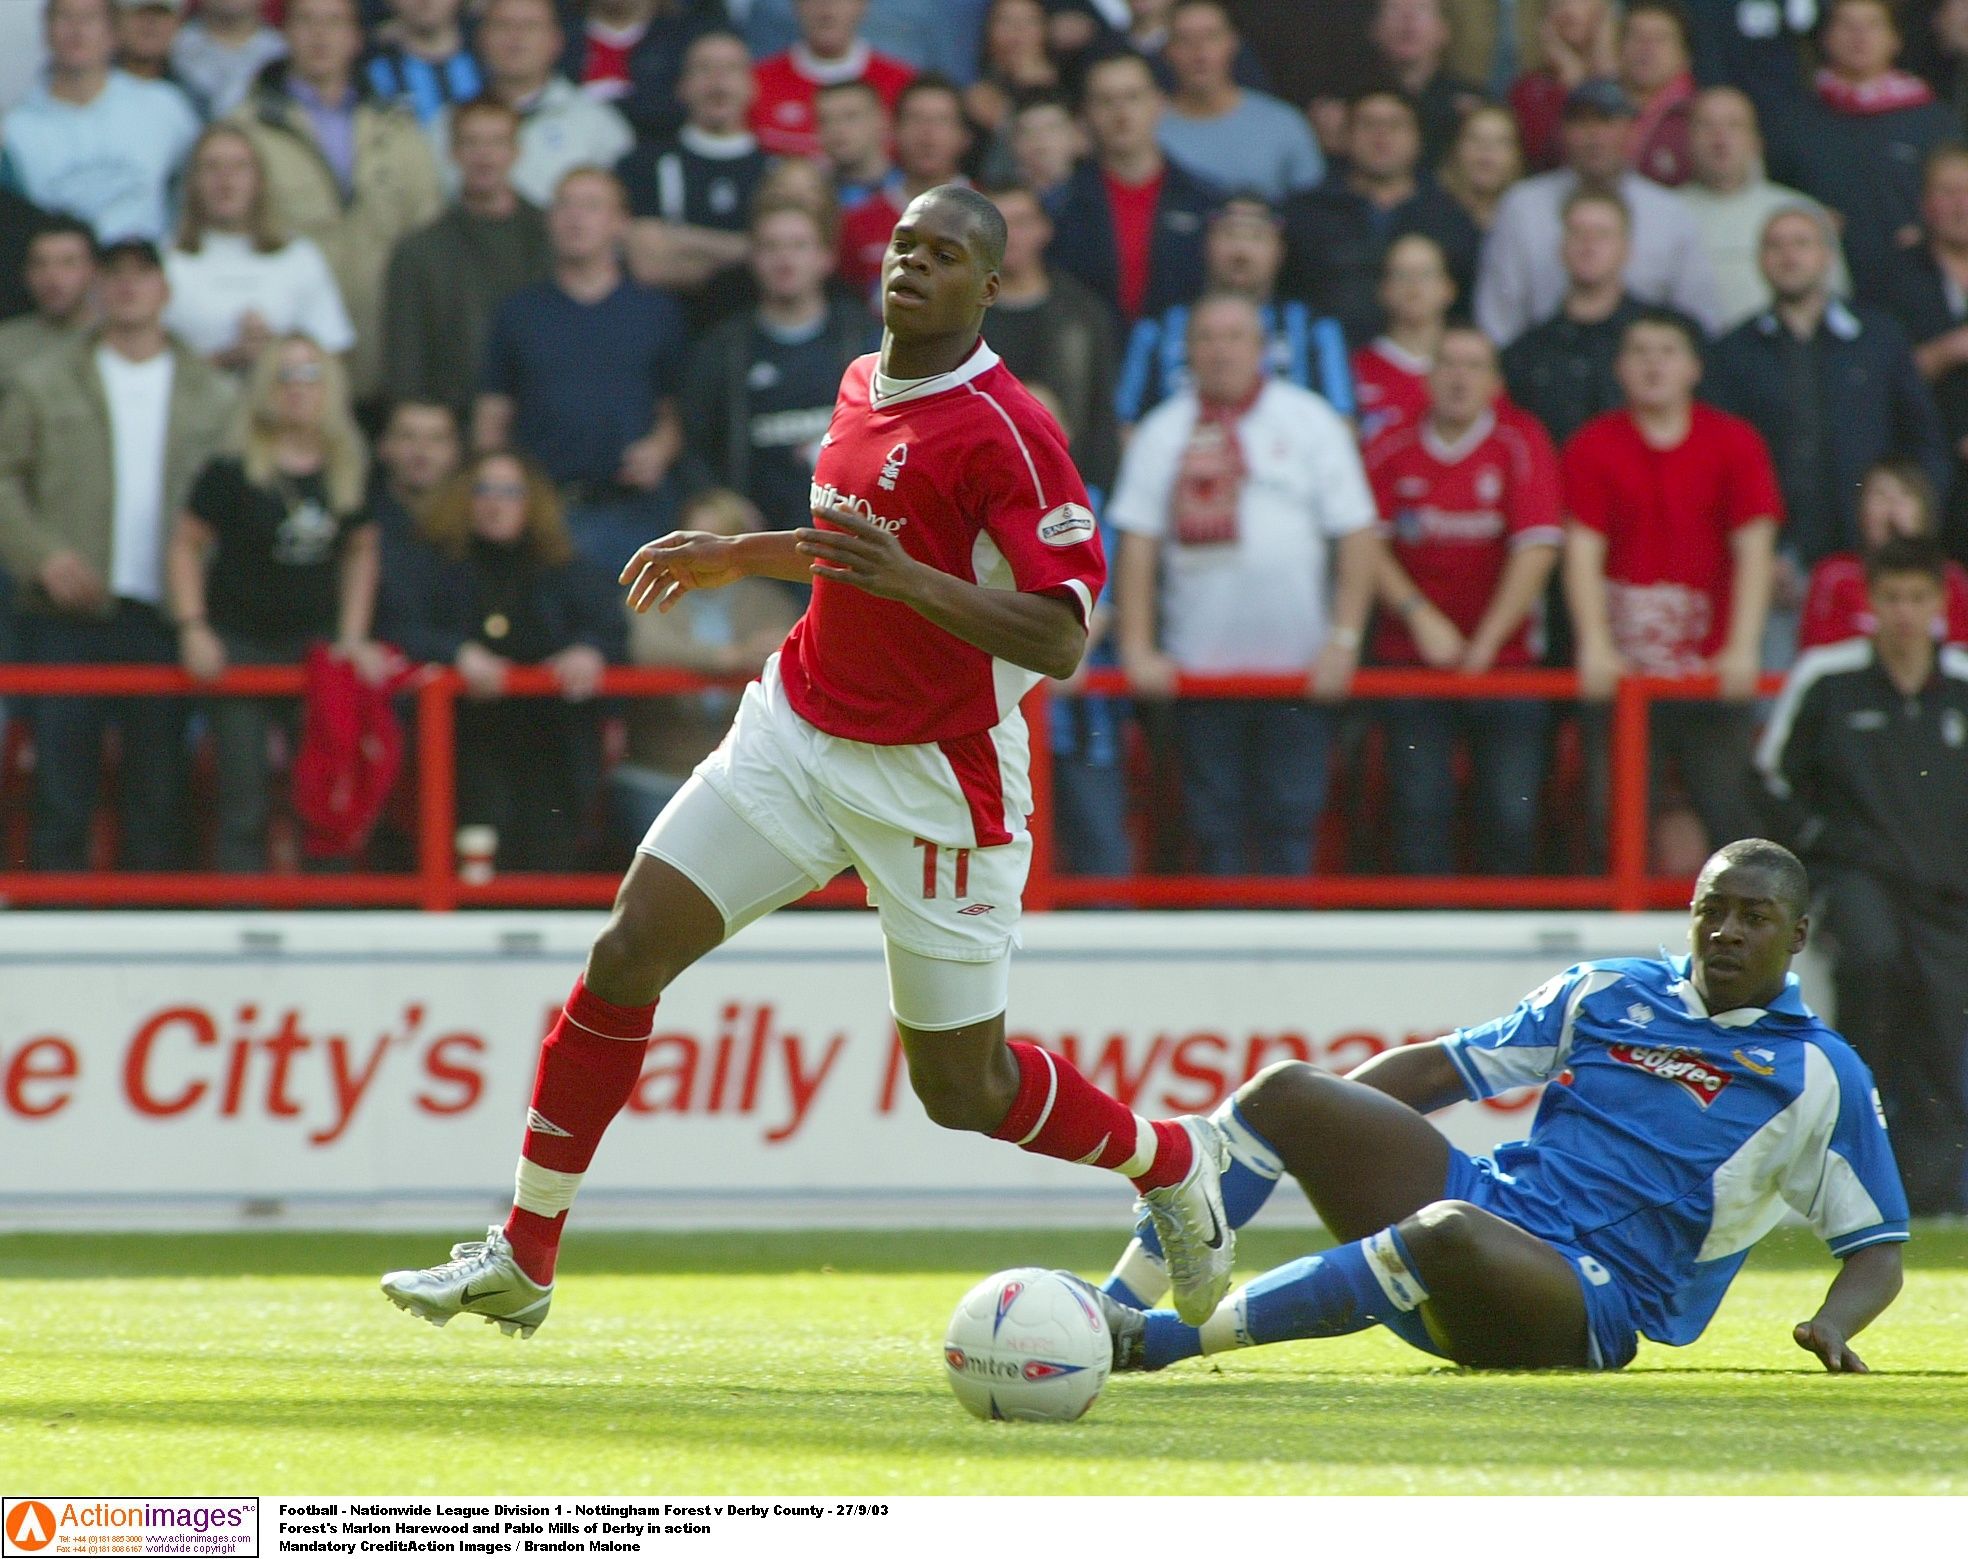 Football - Nationwide League Division 1 - Nottingham Forest v Derby County - 27/9/03 
Forest's Marlon Harewood and Pablo Mills of Derby in action  
Mandatory Credit:Action Images / Brandon Malone